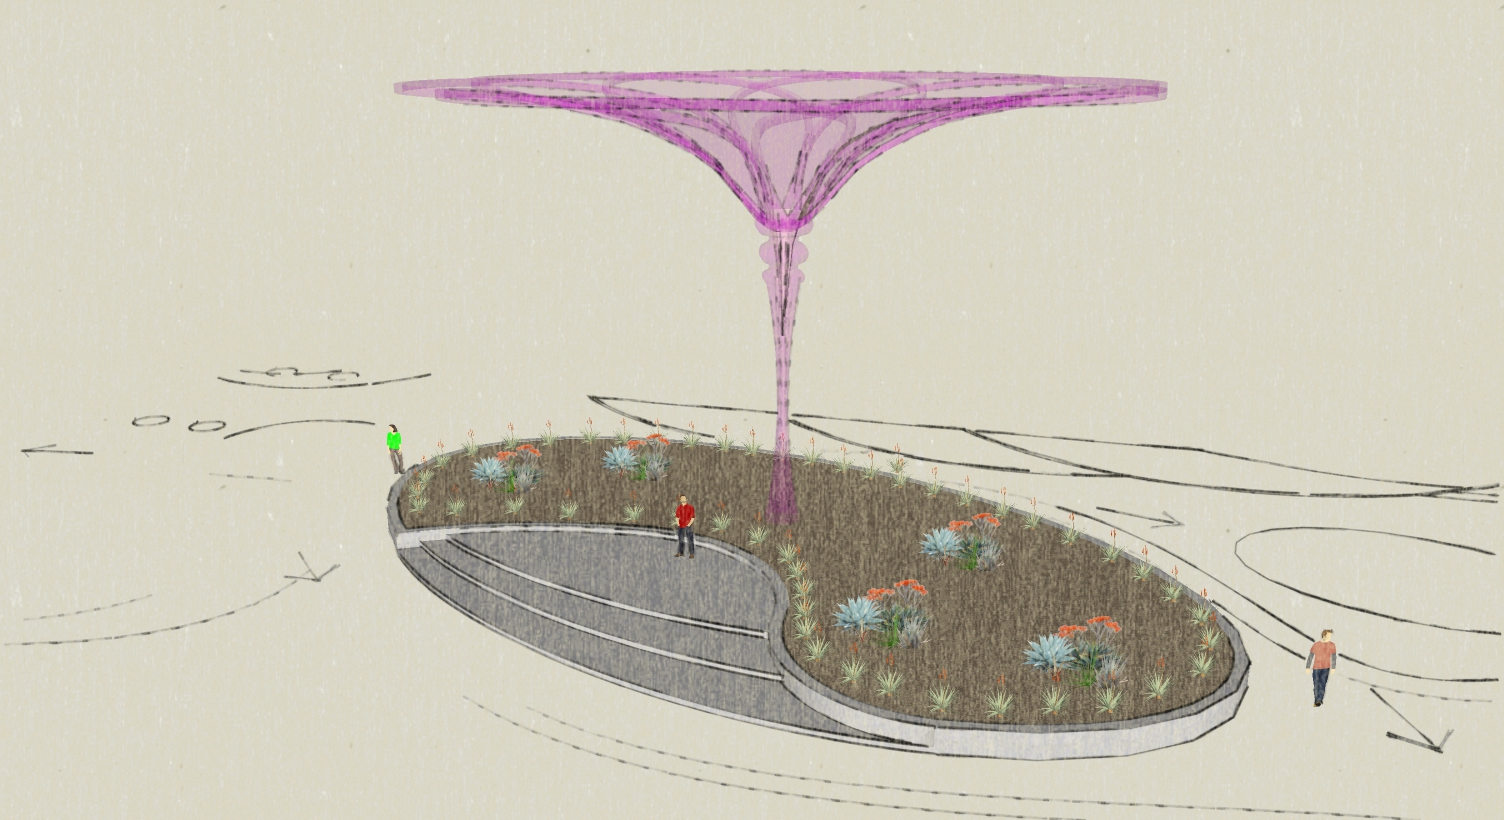 initial rendering of the shade structure/statue.